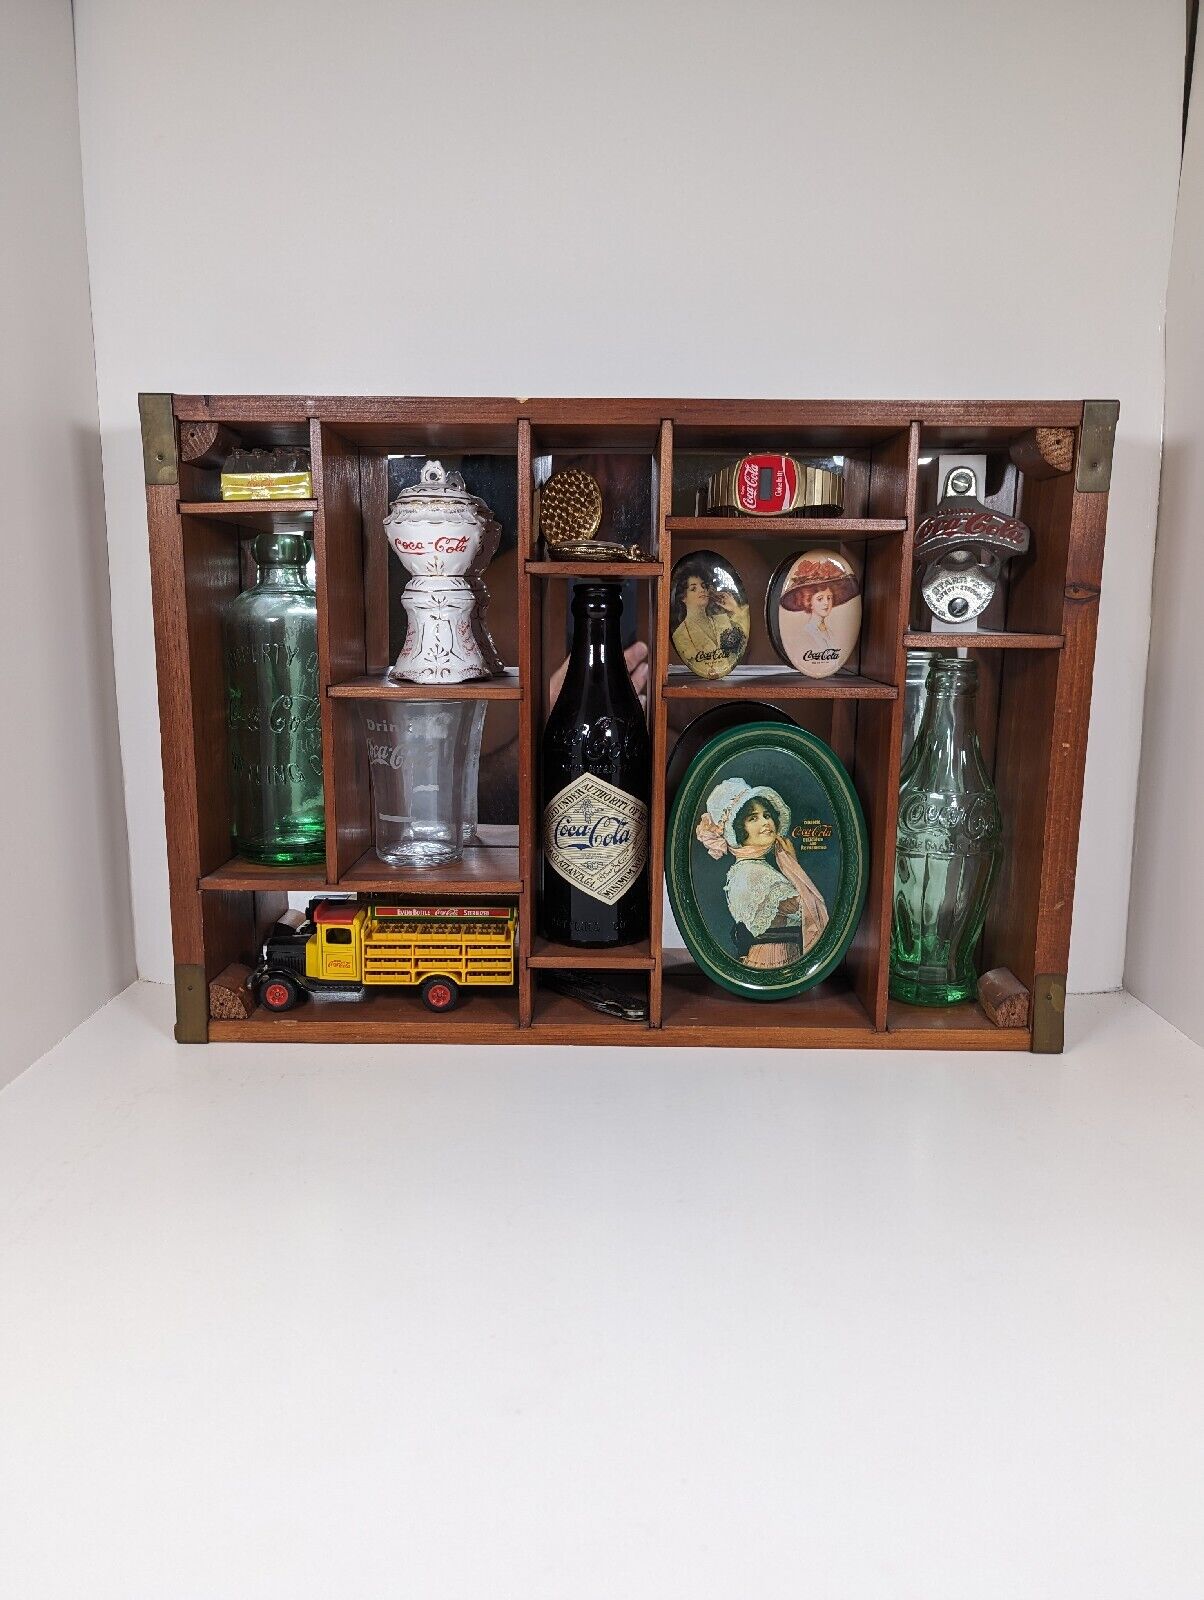 DRINK COCA COLA 100TH CENTENNIAL CELEBRATION SHADOW BOX WITH MULTIPLE ITEMS